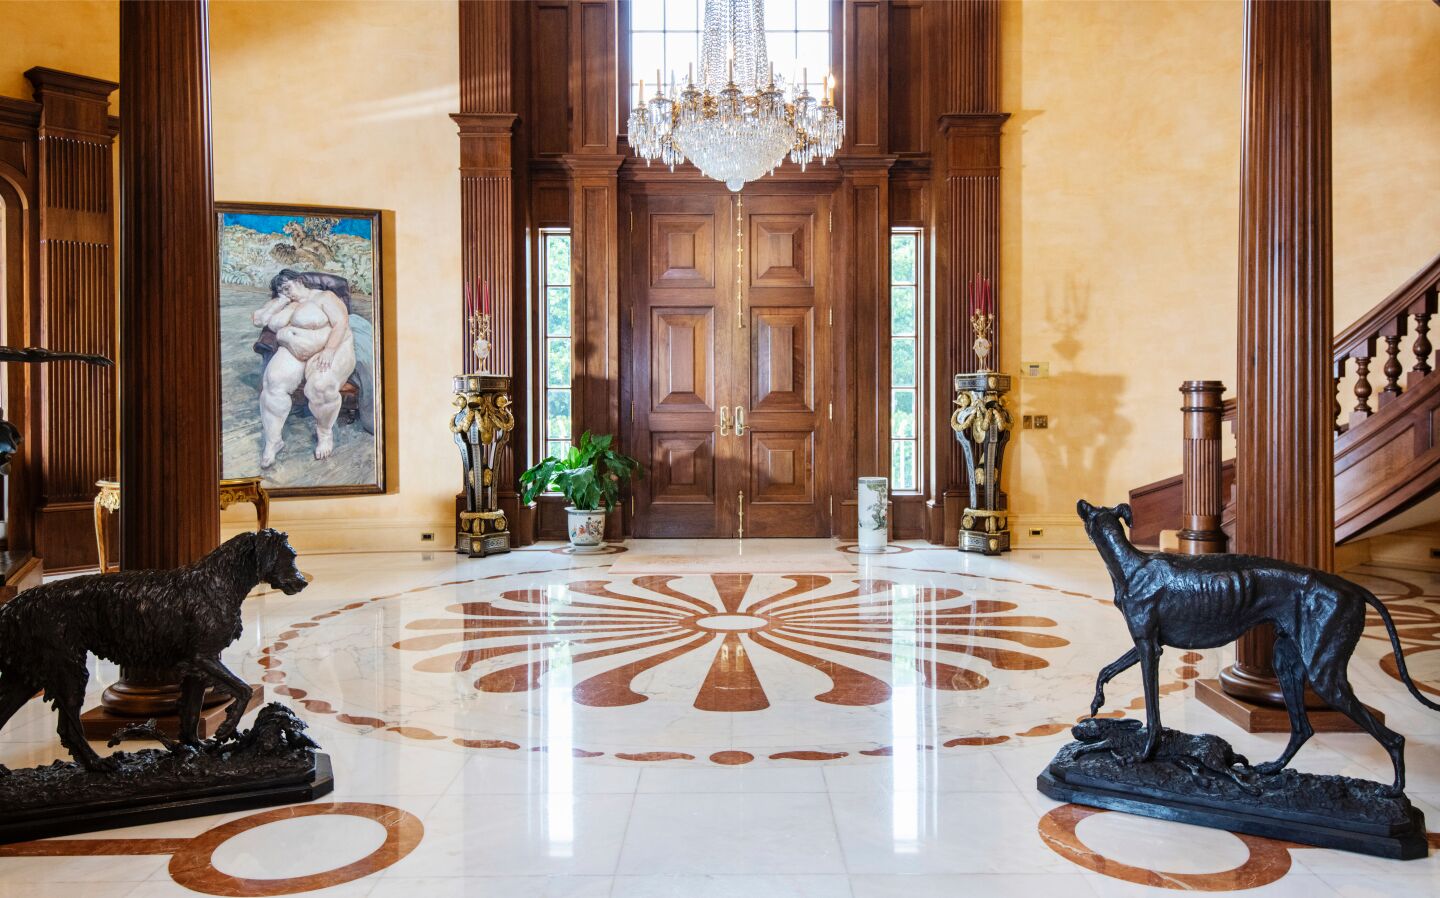 An elaborate chandelier, sculptures of dogs and a classical portrait of a nude woman adorn the foyer.